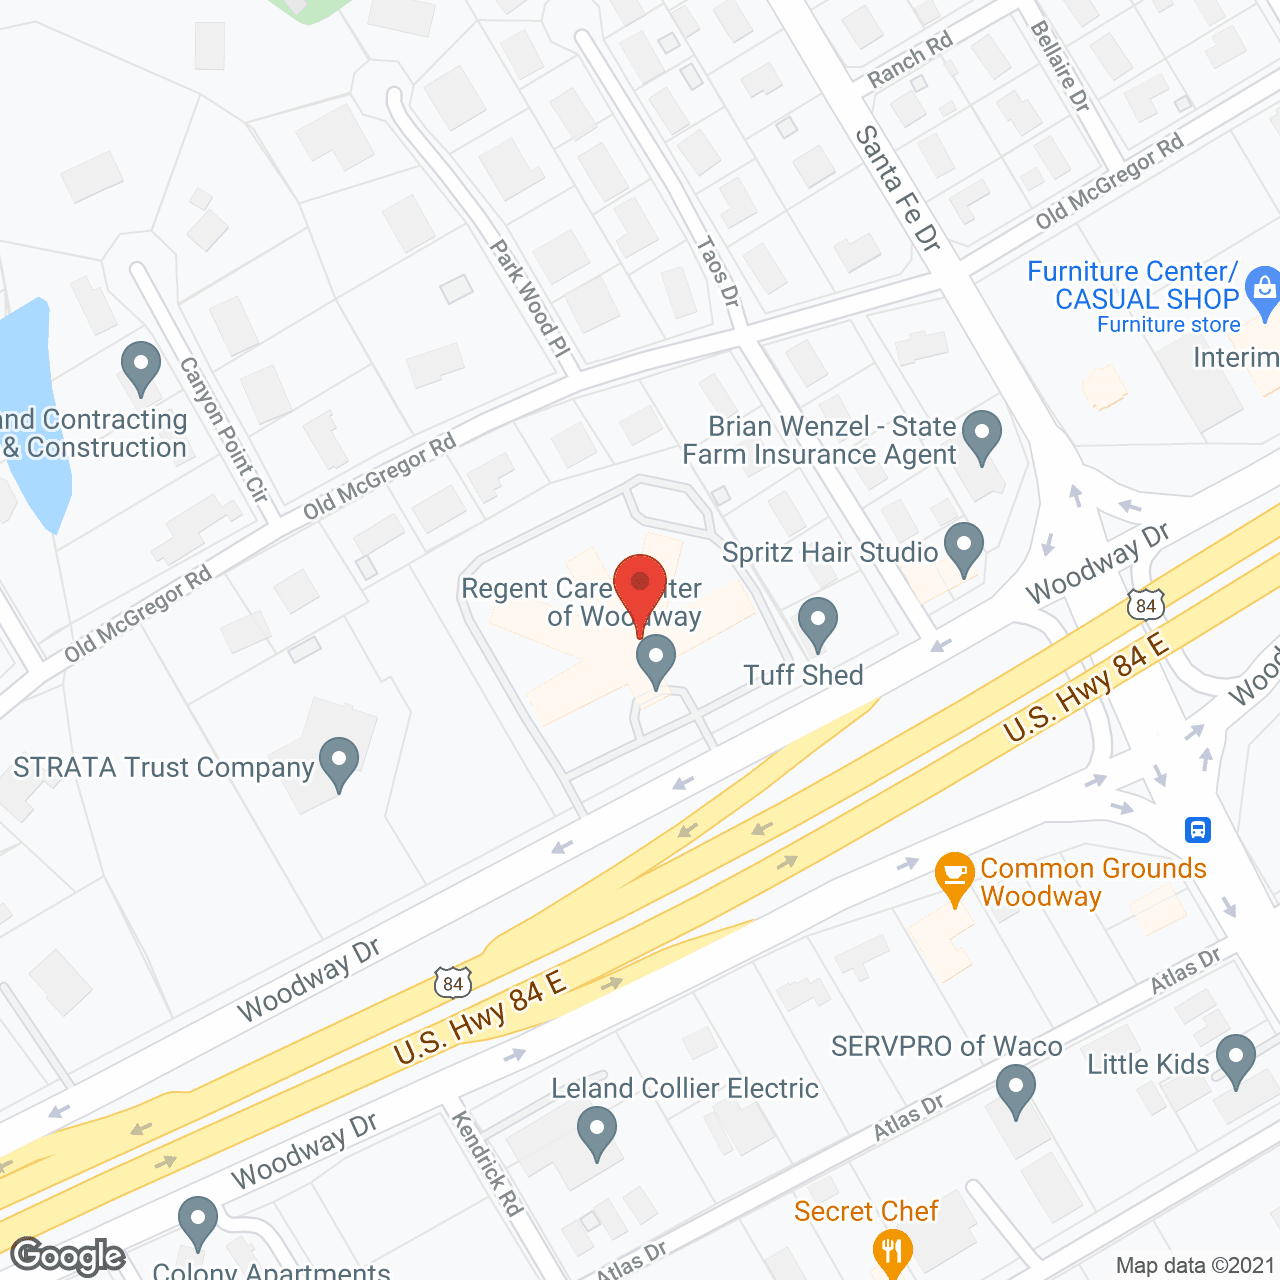 Regent Care Center of Woodway in google map